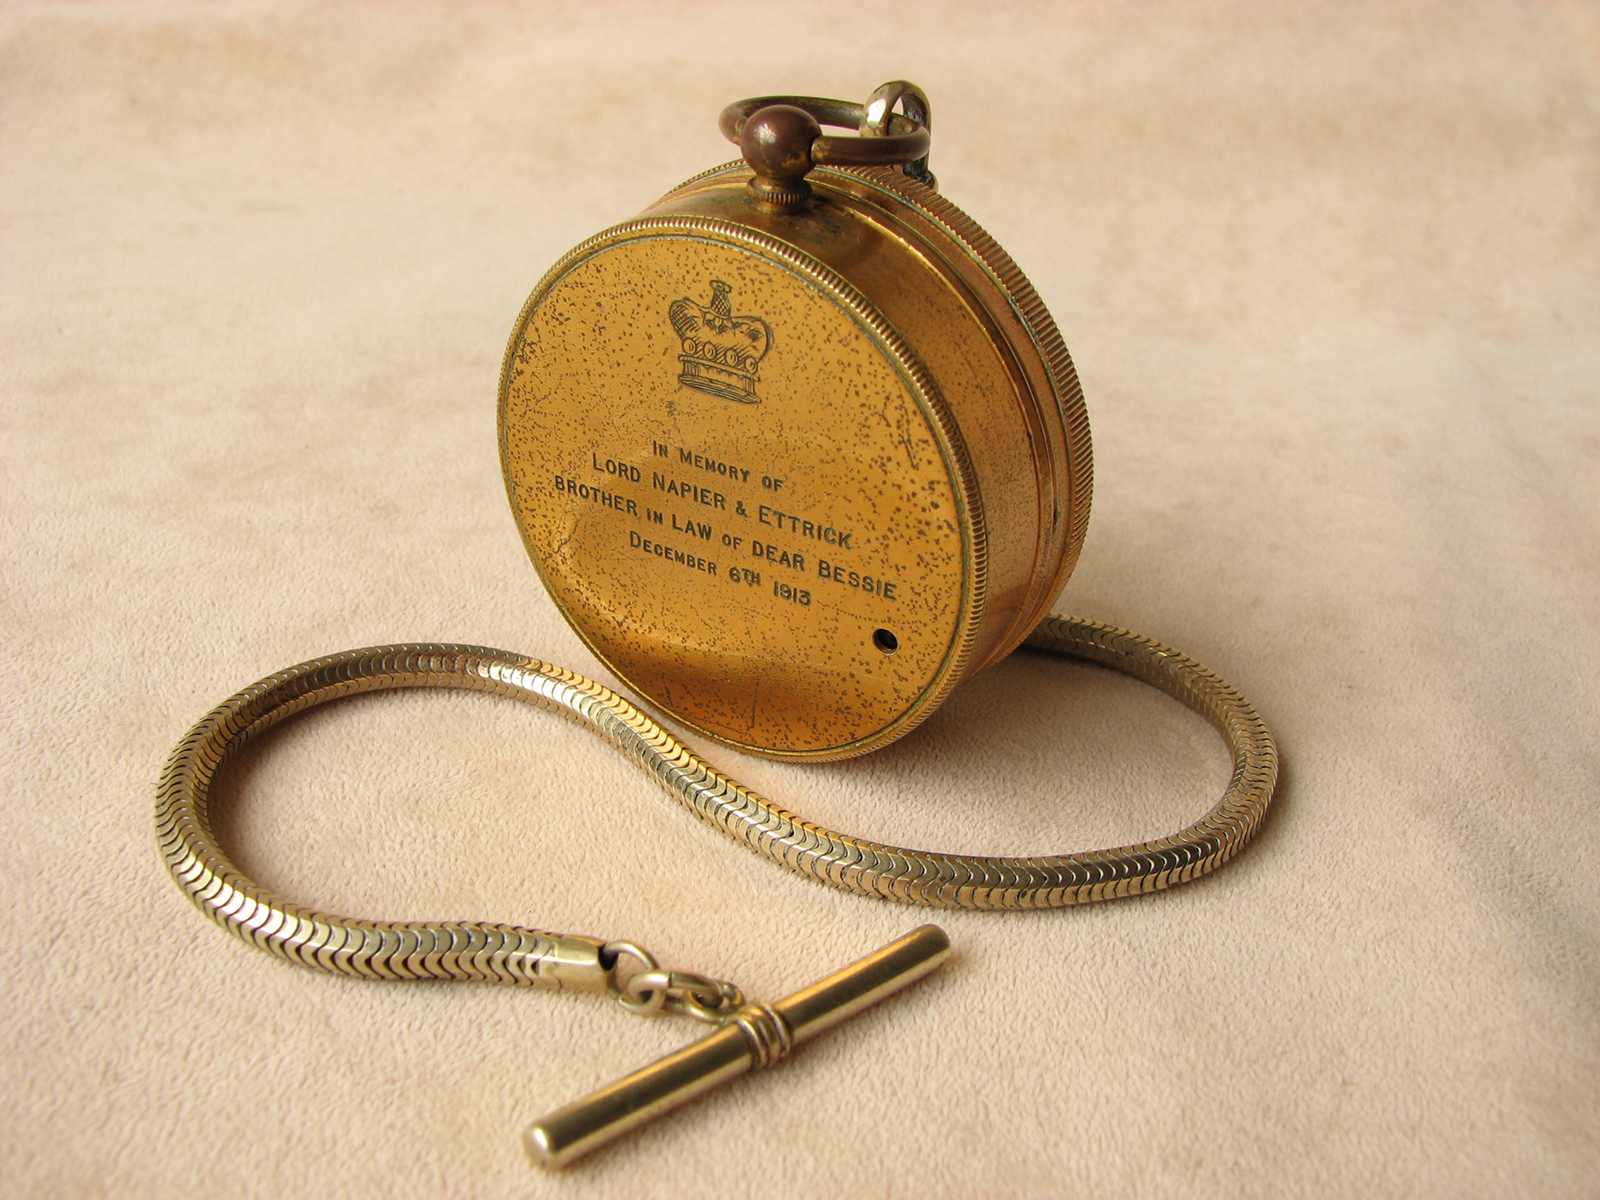 Antique Ross pocket barometer with Lord Napier inscription